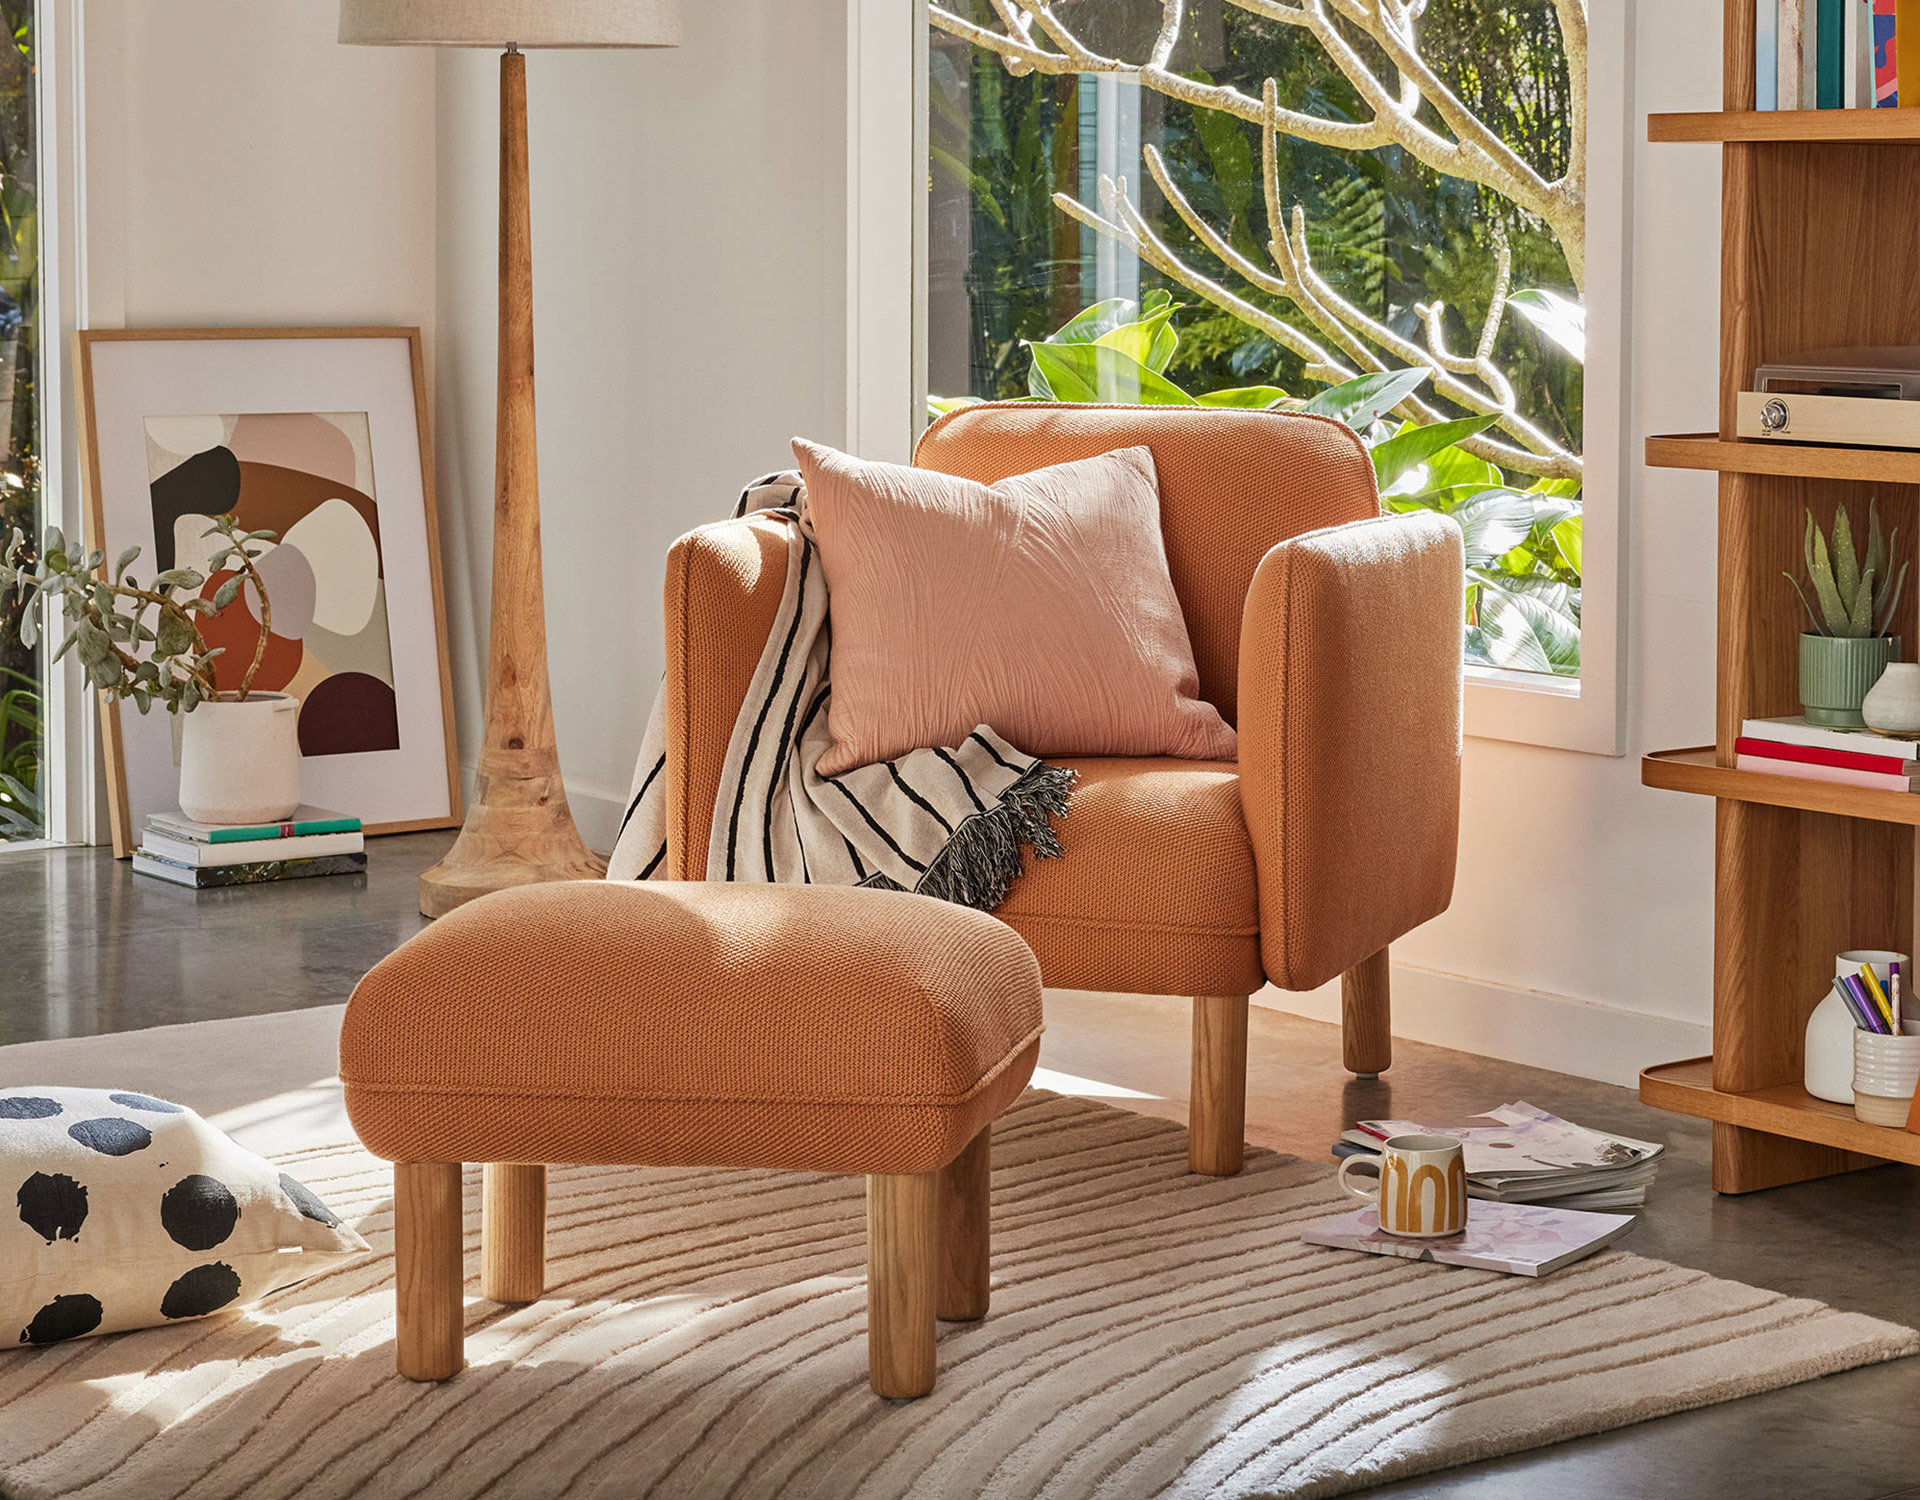 A Koala armchair and ottoman in a bright living room with rug, cushions and accessories